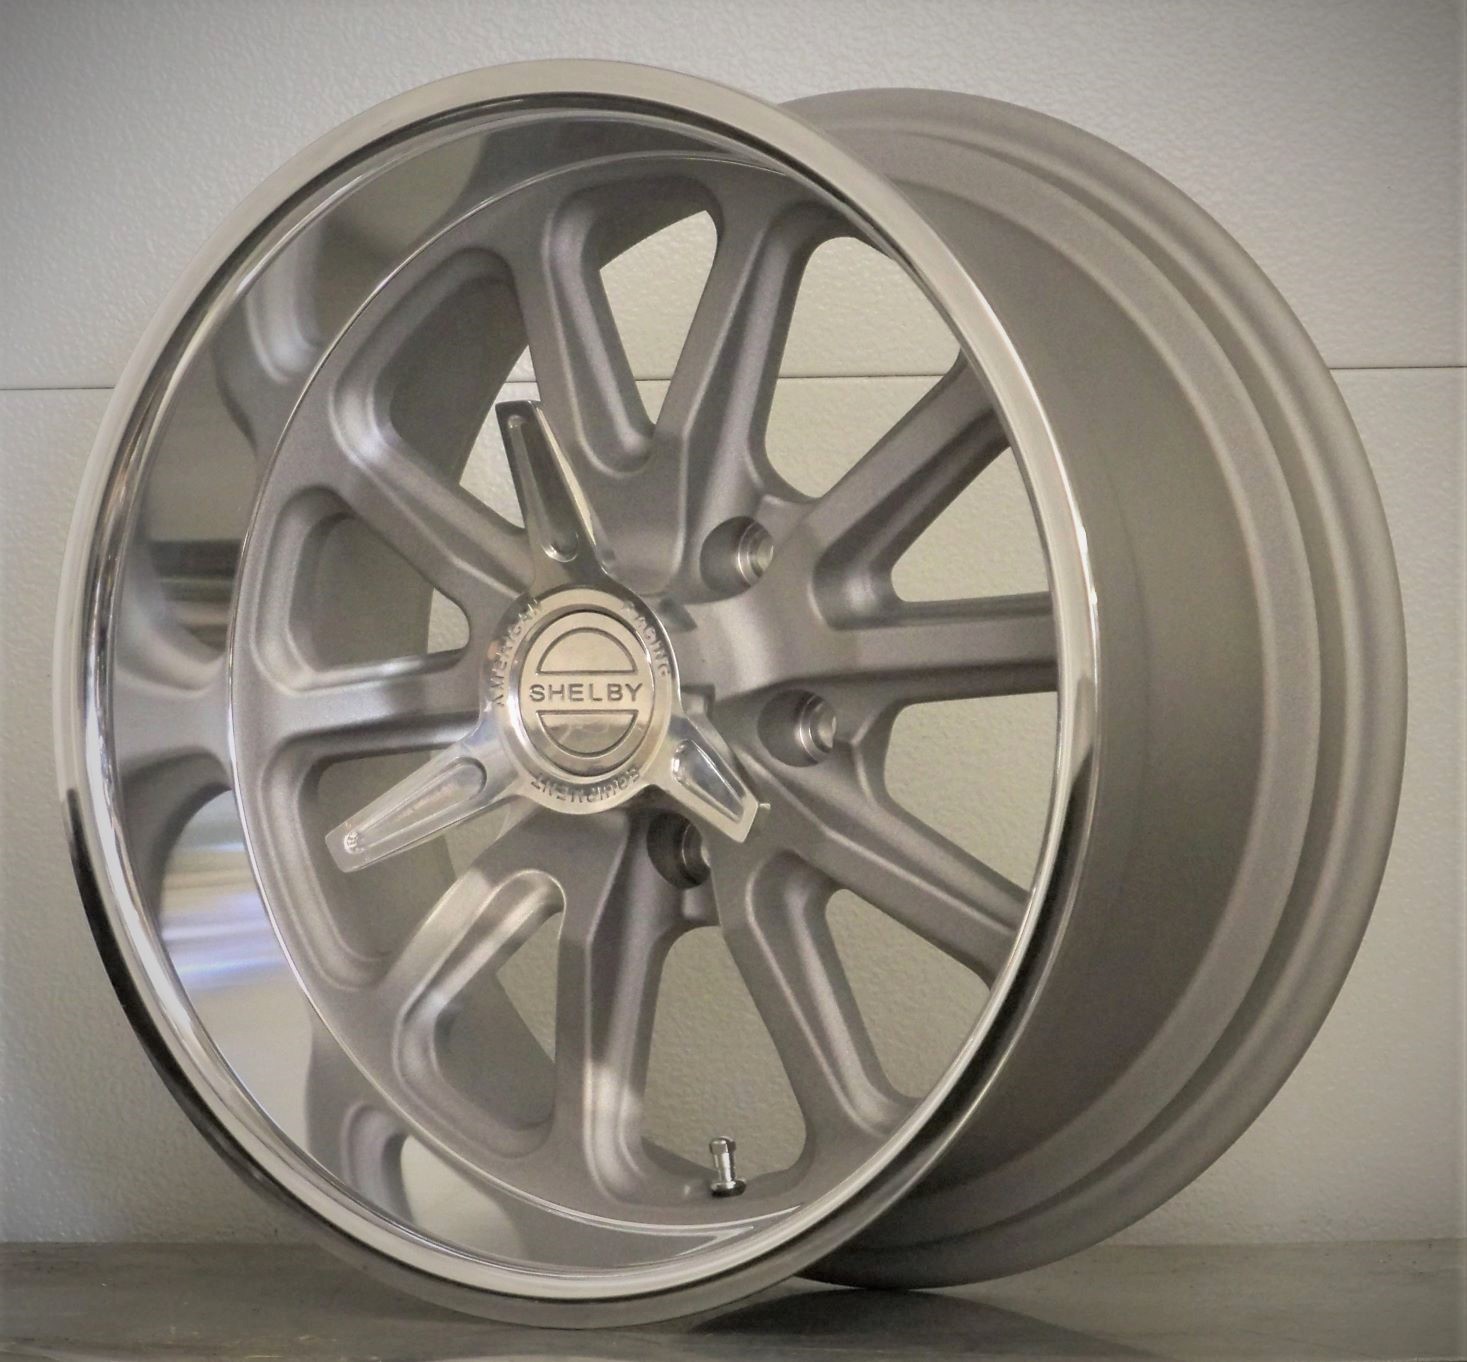 U111S US Mags silver gray with Shelby Spinners